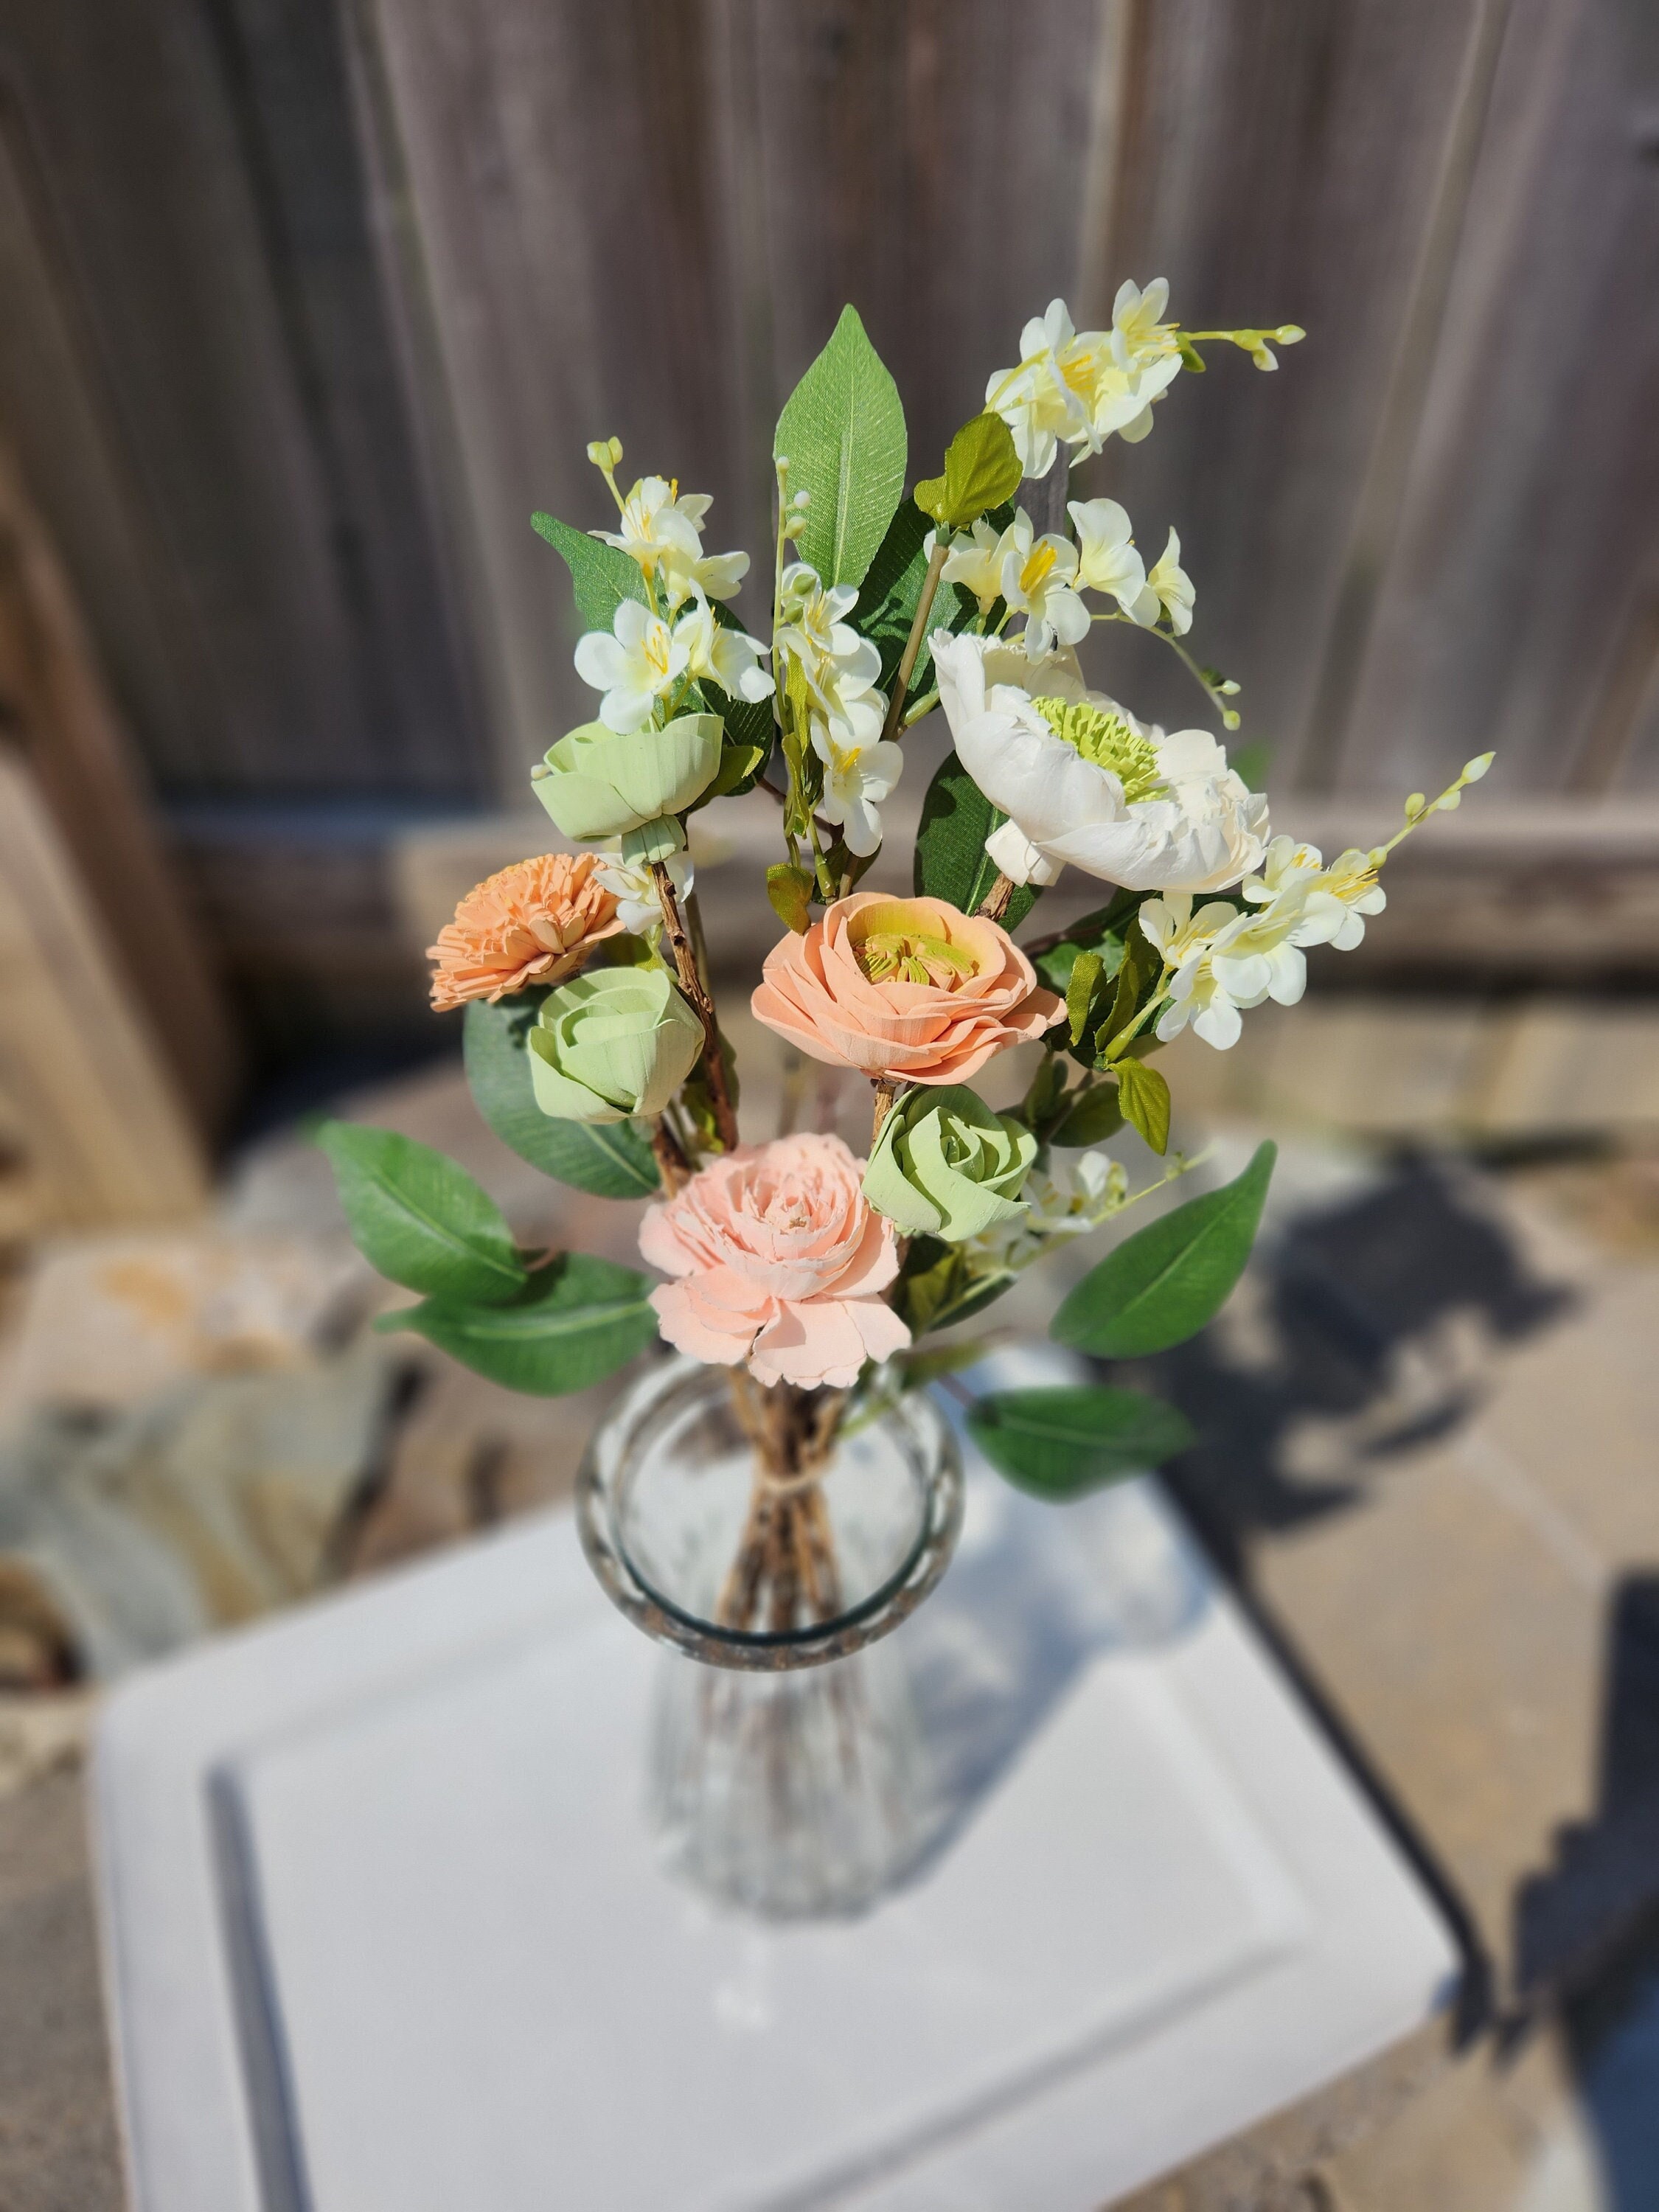 Floral Arranging in a Clear Vase - the Wrong Way! - Oh! You're Lovely -  Sola Wood Flowers